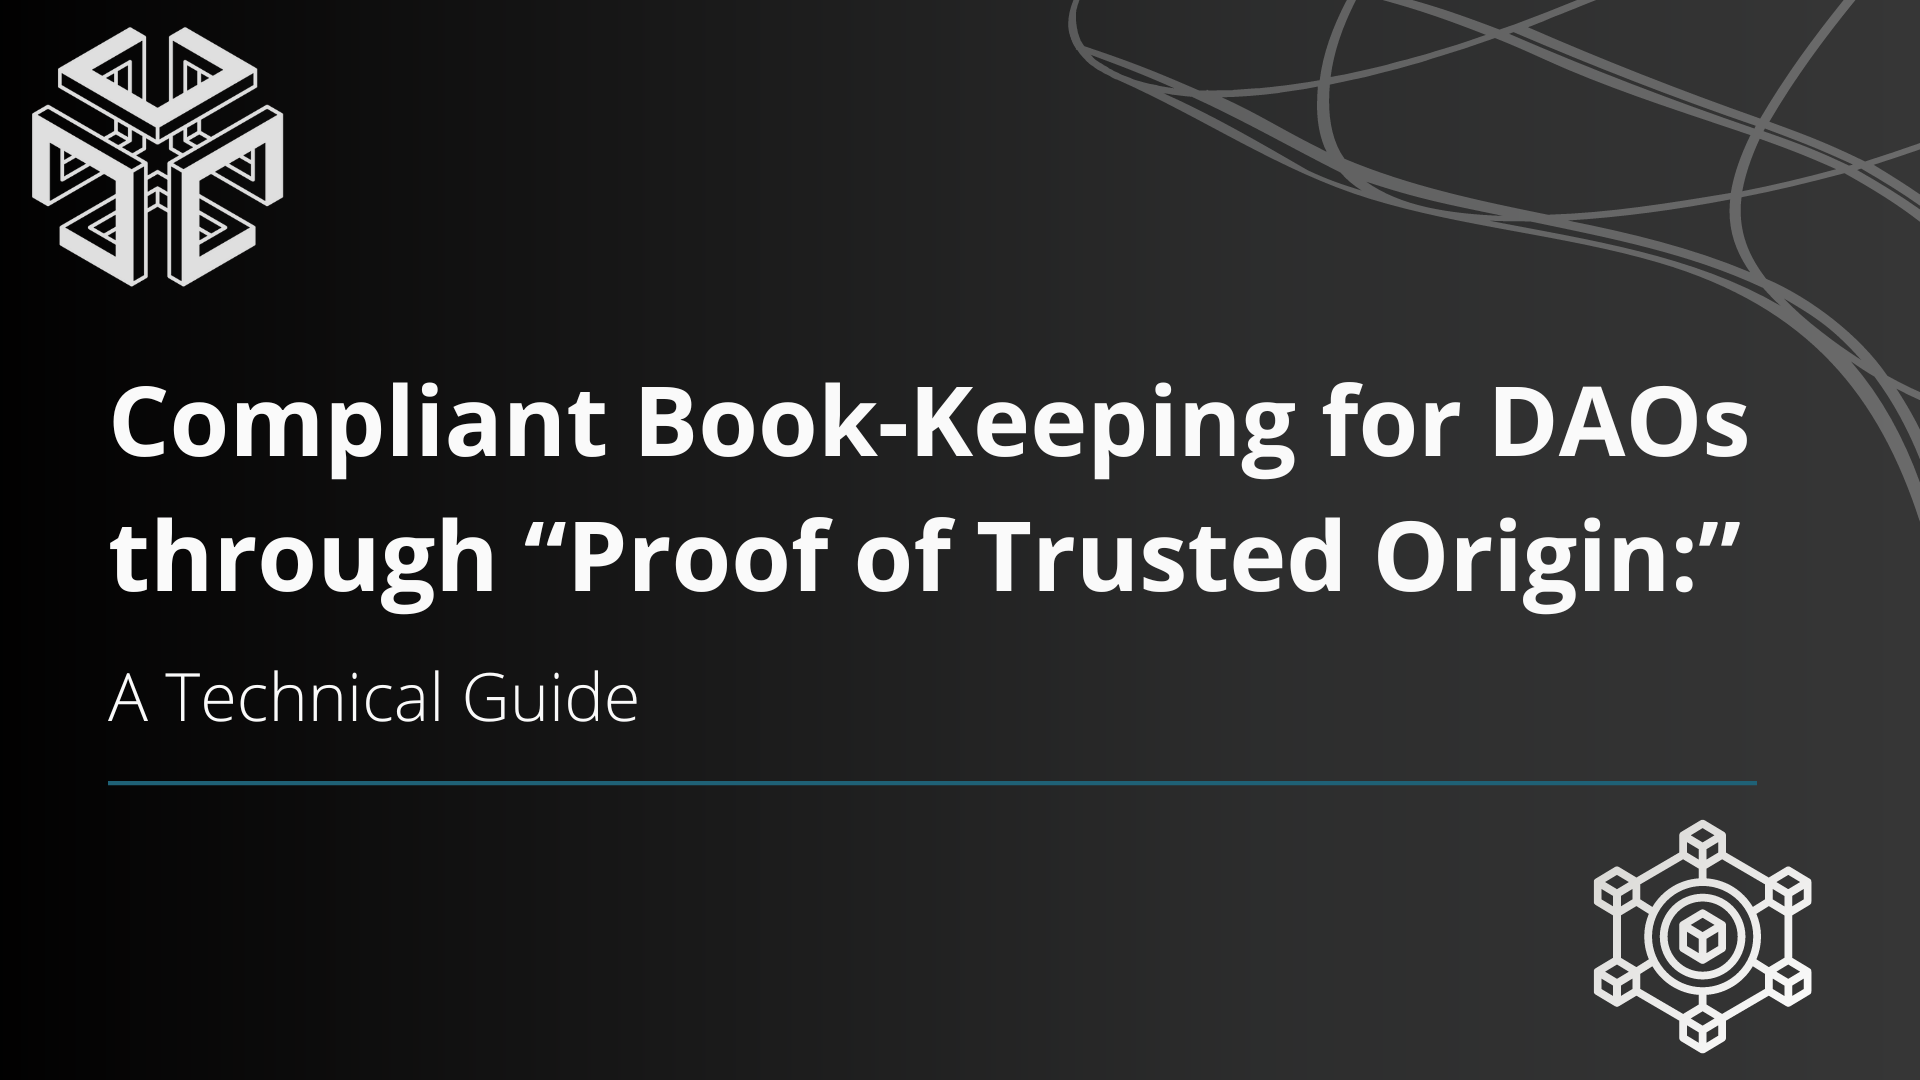 Compliant Book-Keeping for DAOs through “Proof of Trusted Origin:” A Technical Guide